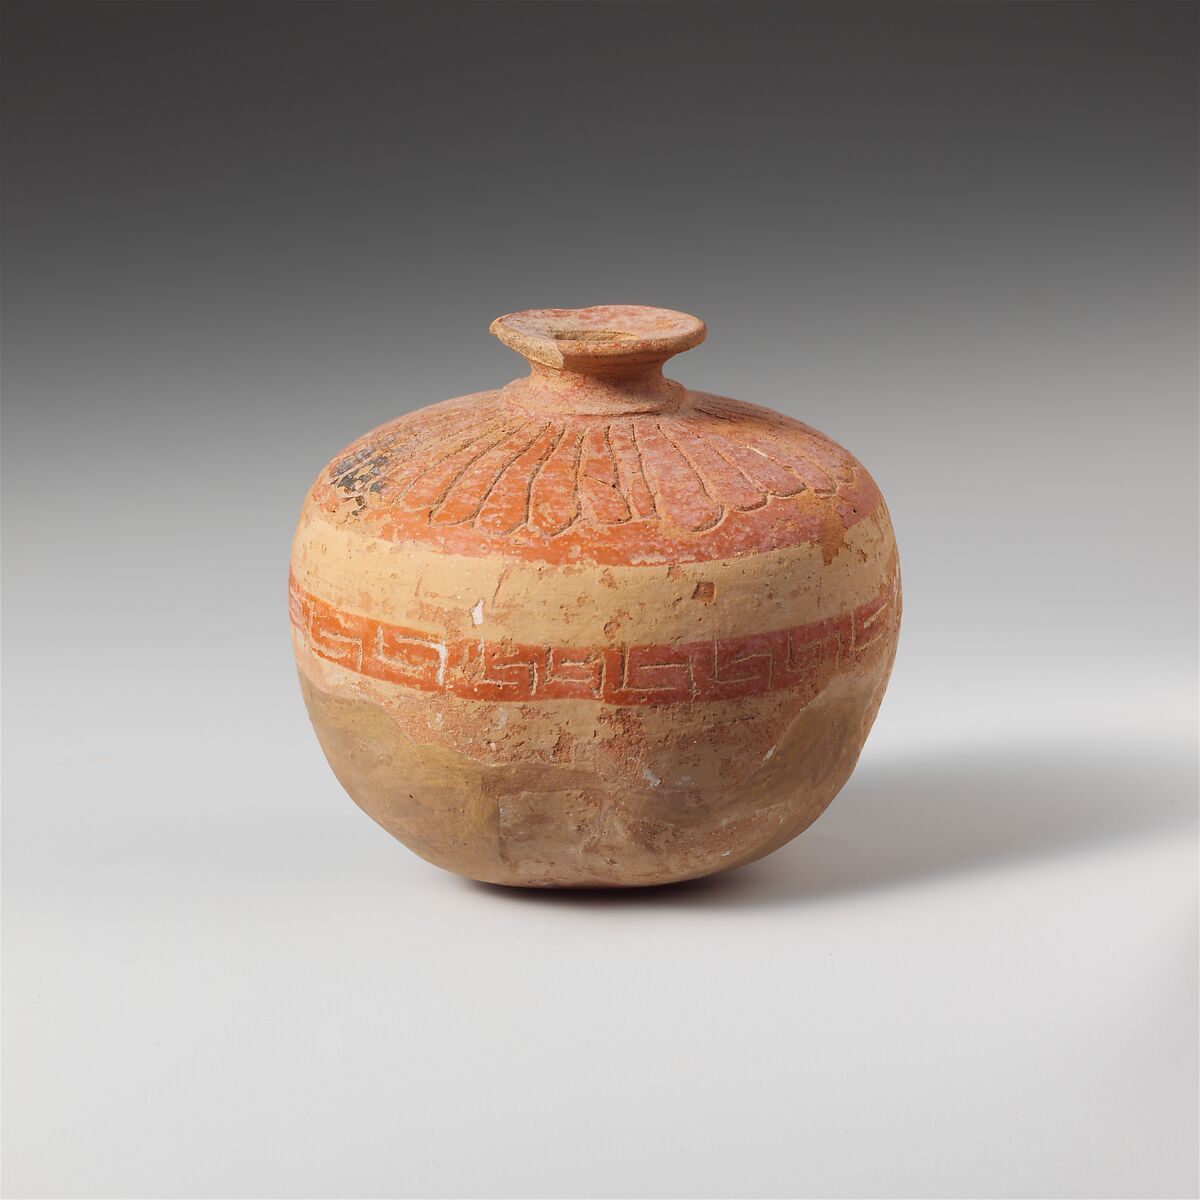 Terracotta aryballos (oil flask) in the form of a pomegranate, Terracotta, Lydian 